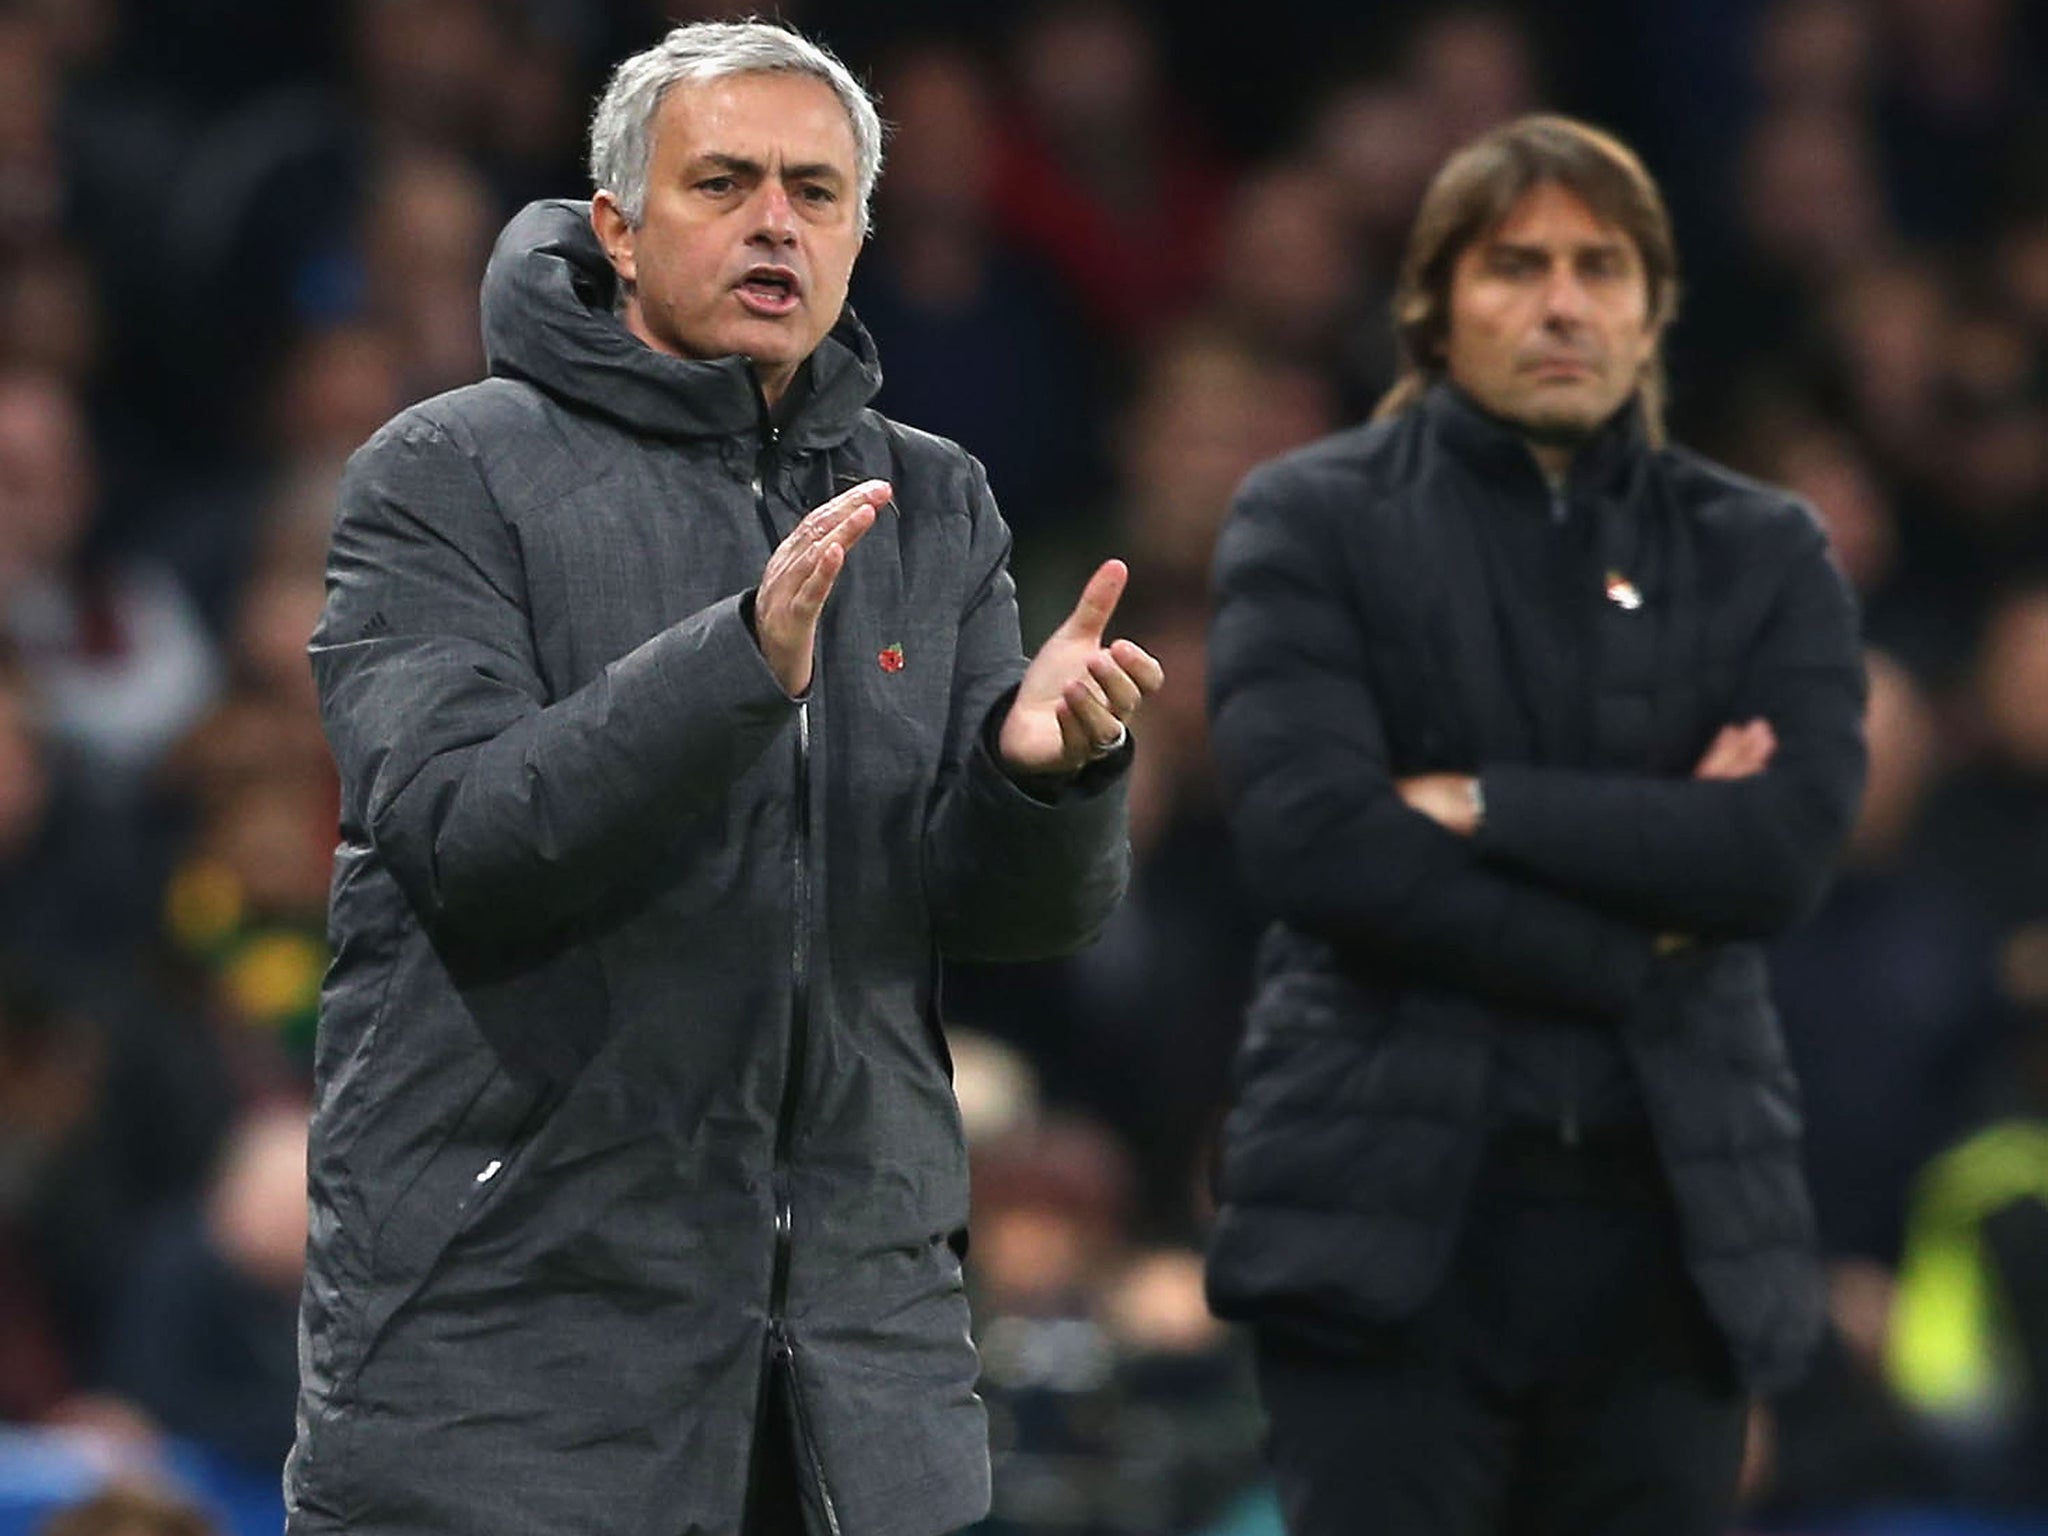 Mourinho was not overly concerned about Conte's handshake snub